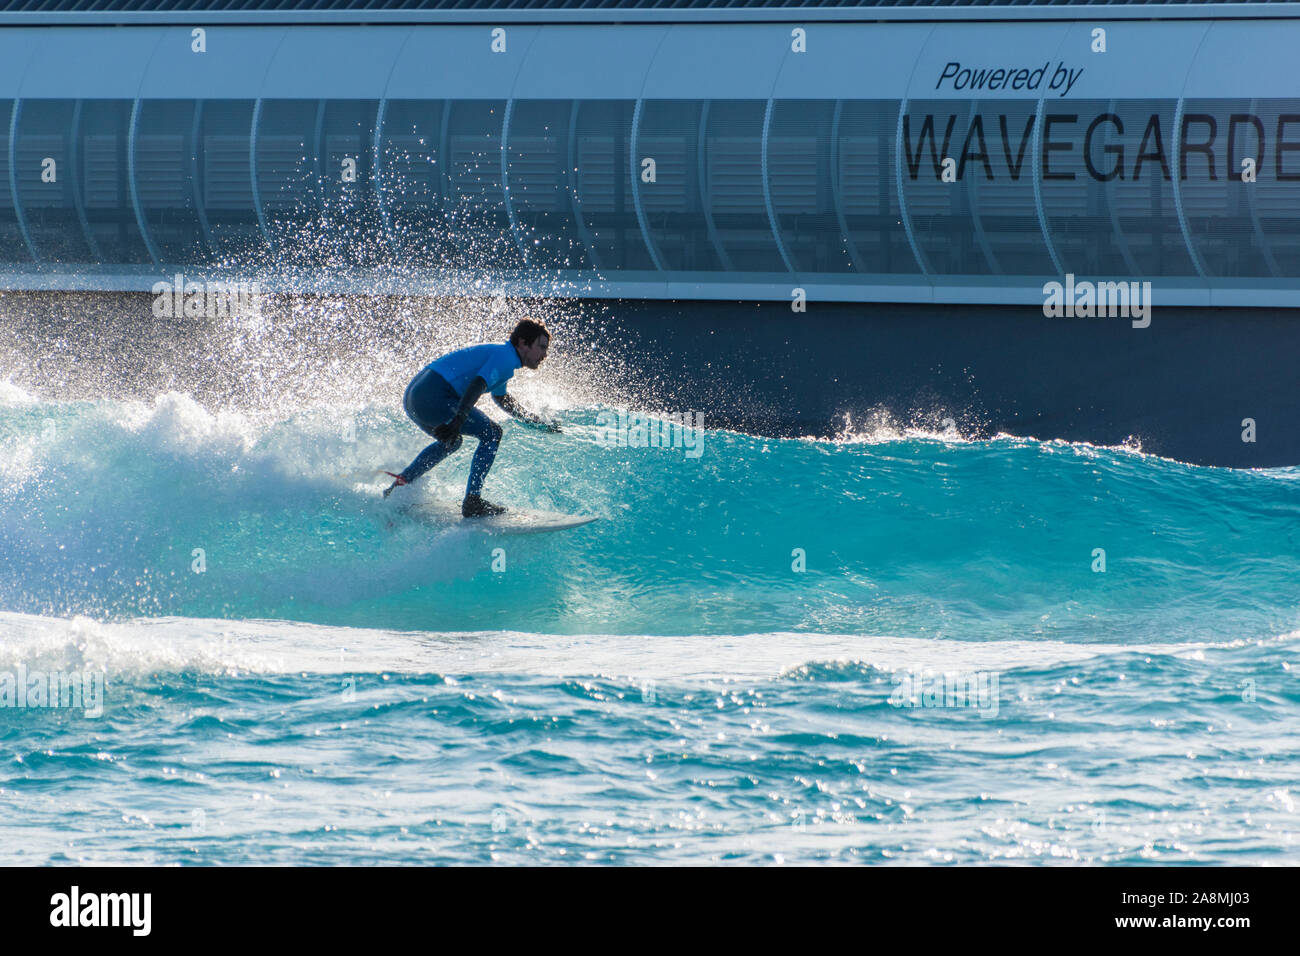 Surfer riding advanced level waves at The wave, Bristol, an artificial inland surfing lake near Bristol, UK. Stock Photo